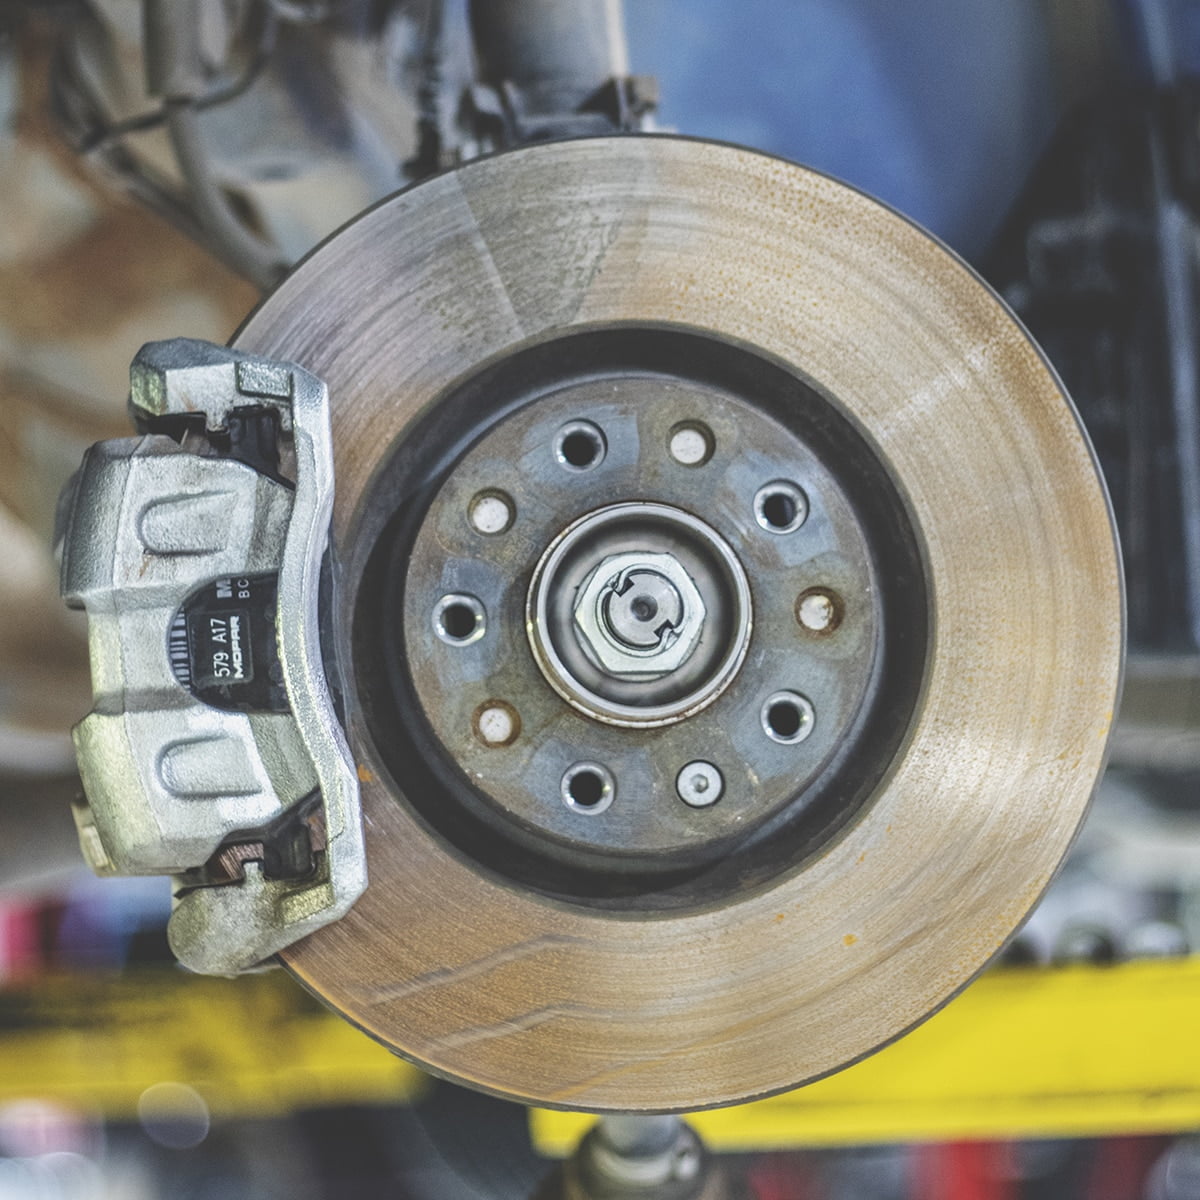 Causes of Squeaking Brakes and When to Get Them Checked